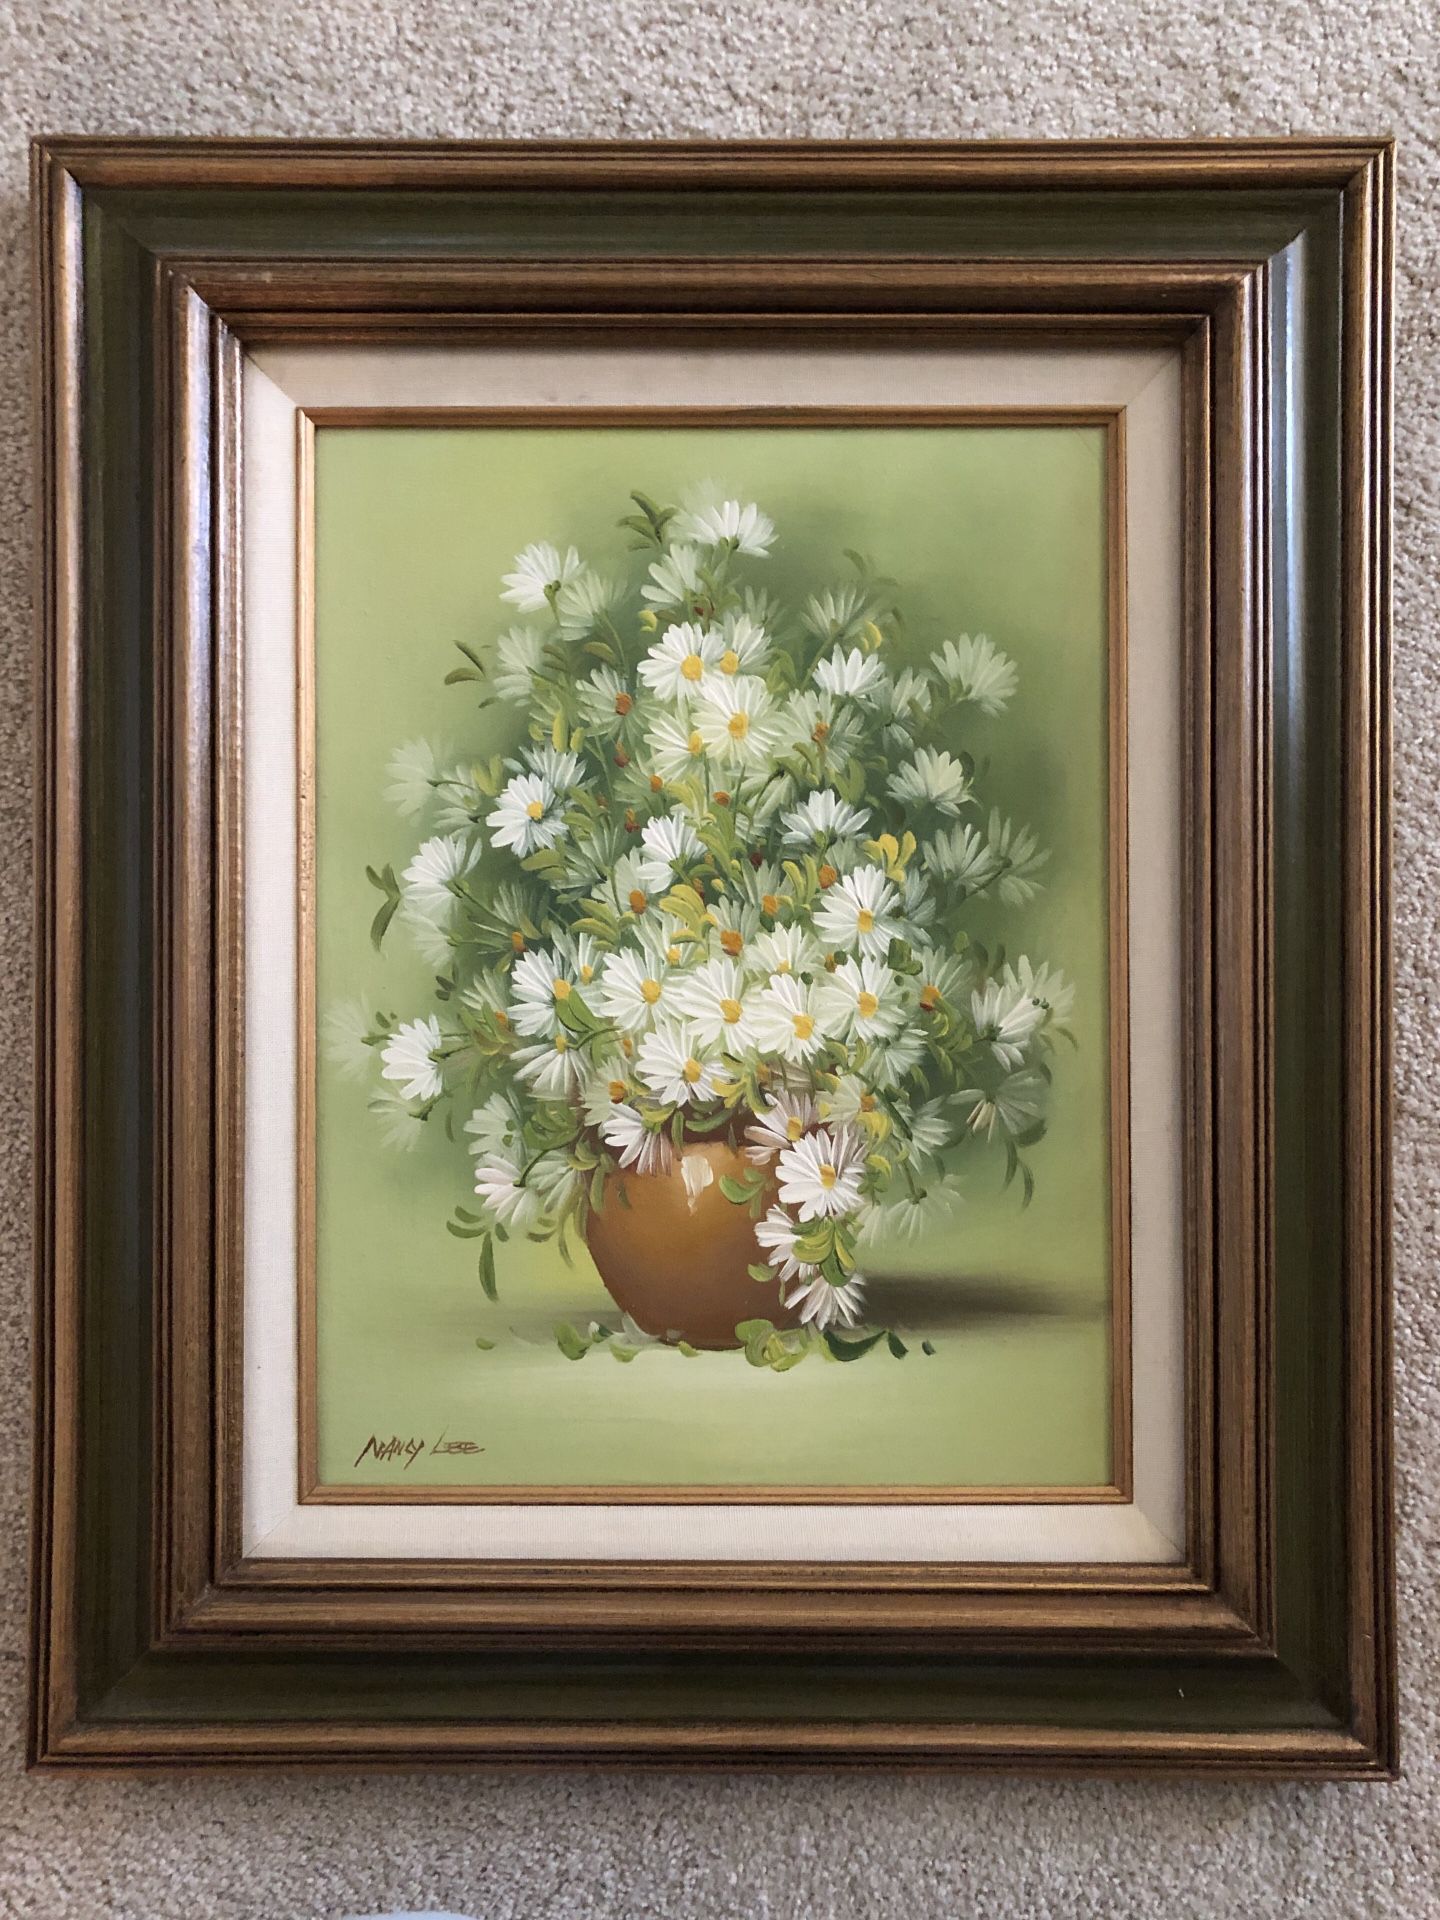 Framed Oil Painting of Daises in Vase on Canvas by Nancy Lee. 20 inches wide by 24 inches tall.